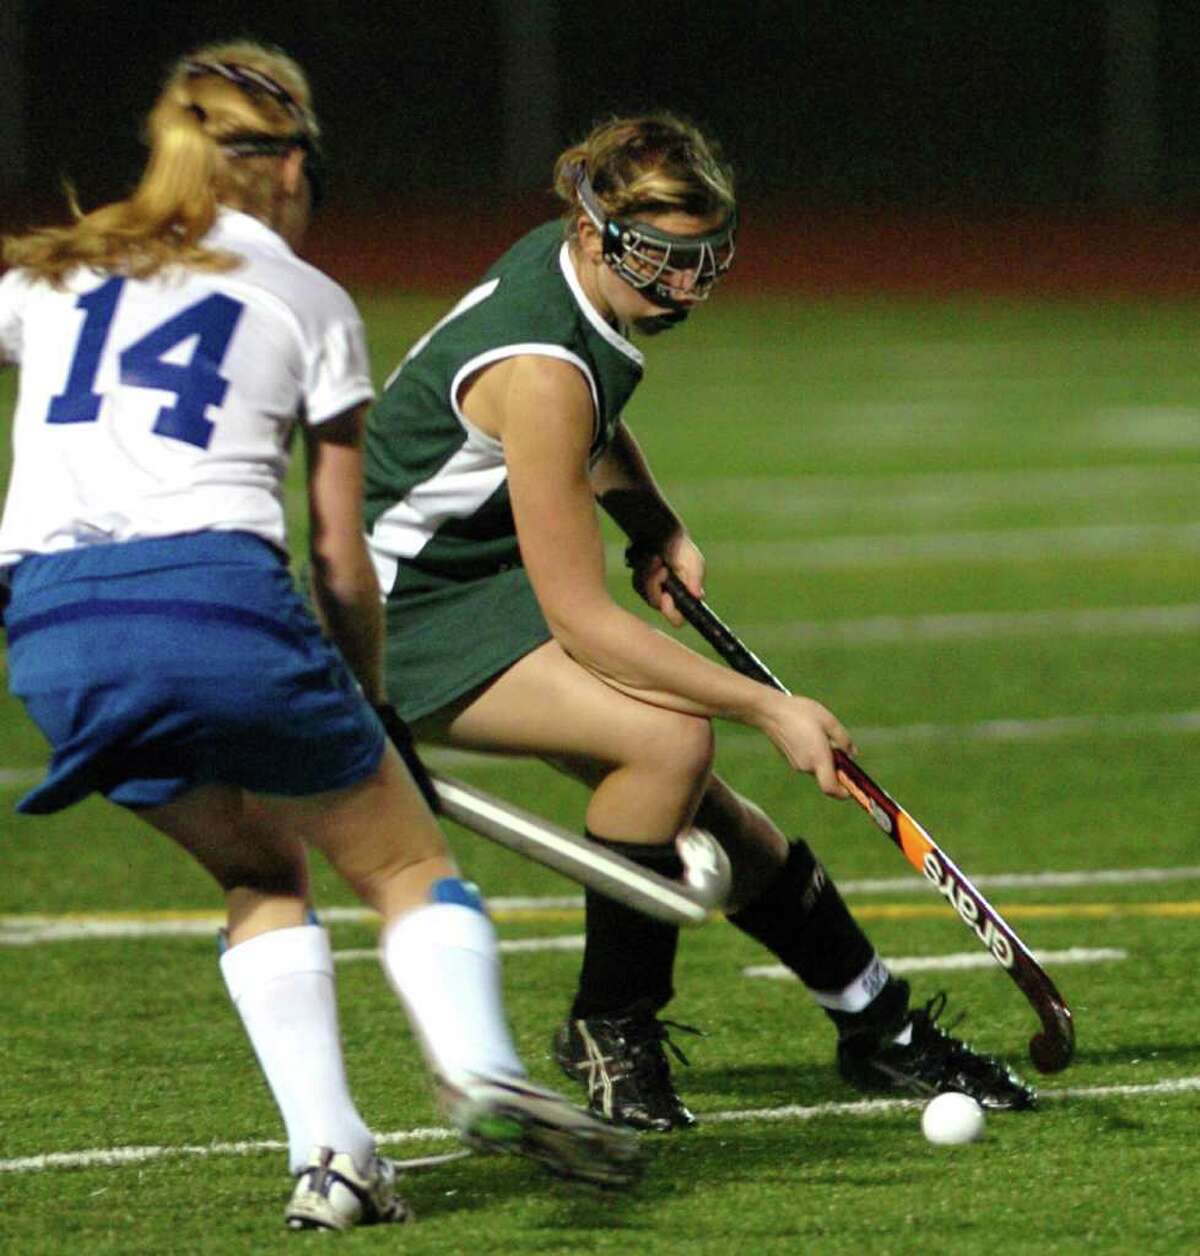 New Milford competes with Glastonbury during the field hockey game at Watertown High School Nov. 16, 2010.